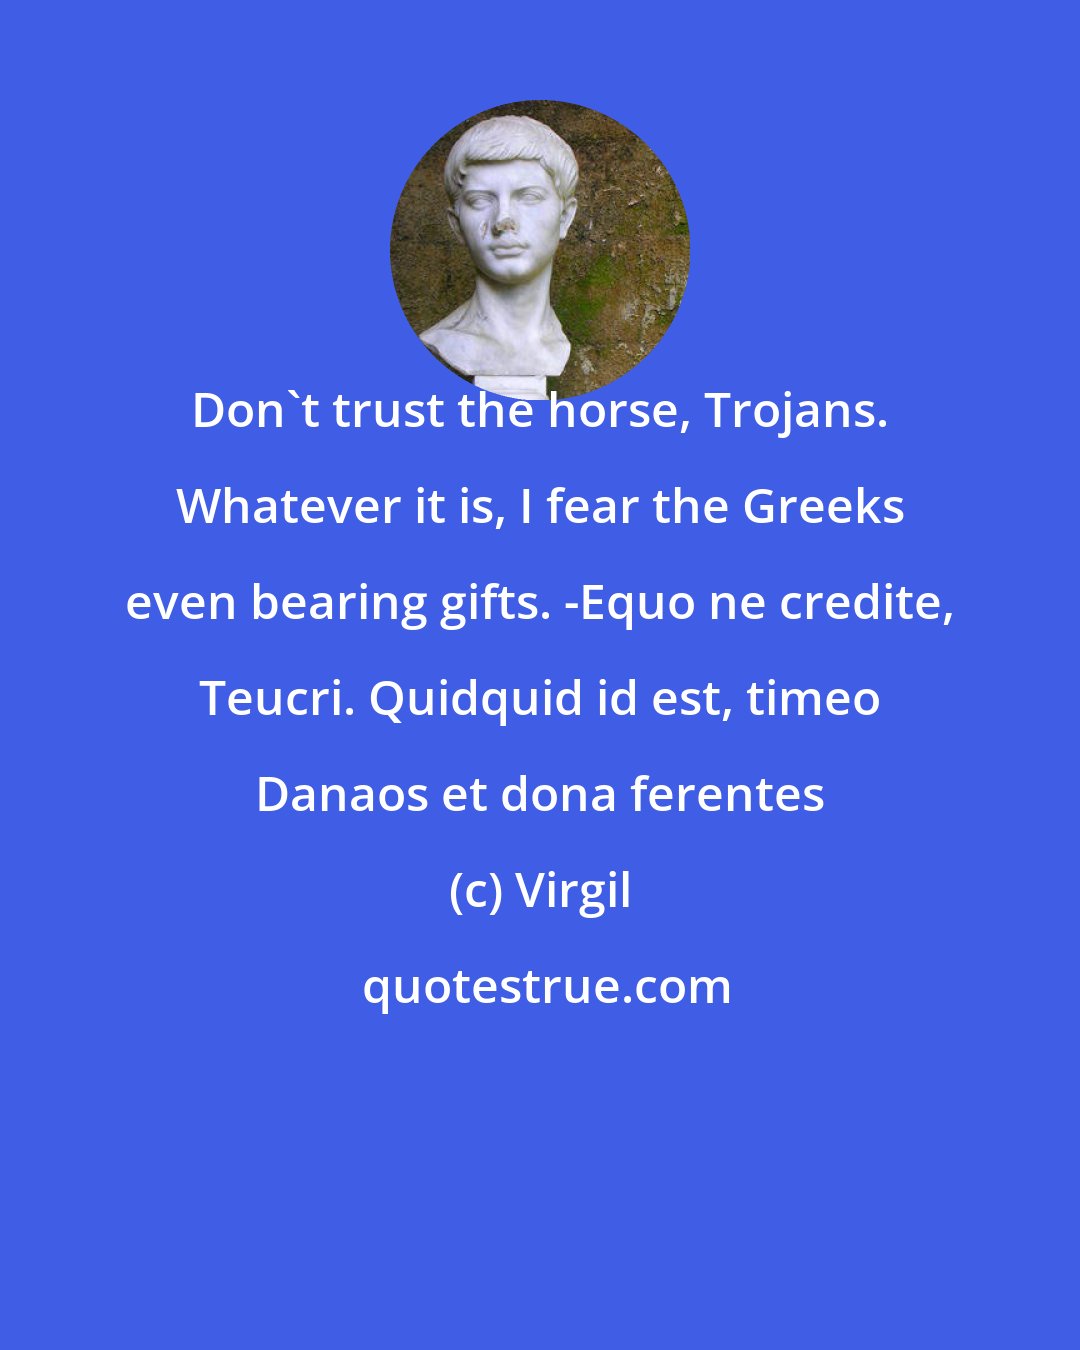 Virgil: Don't trust the horse, Trojans. Whatever it is, I fear the Greeks even bearing gifts. -Equo ne credite, Teucri. Quidquid id est, timeo Danaos et dona ferentes